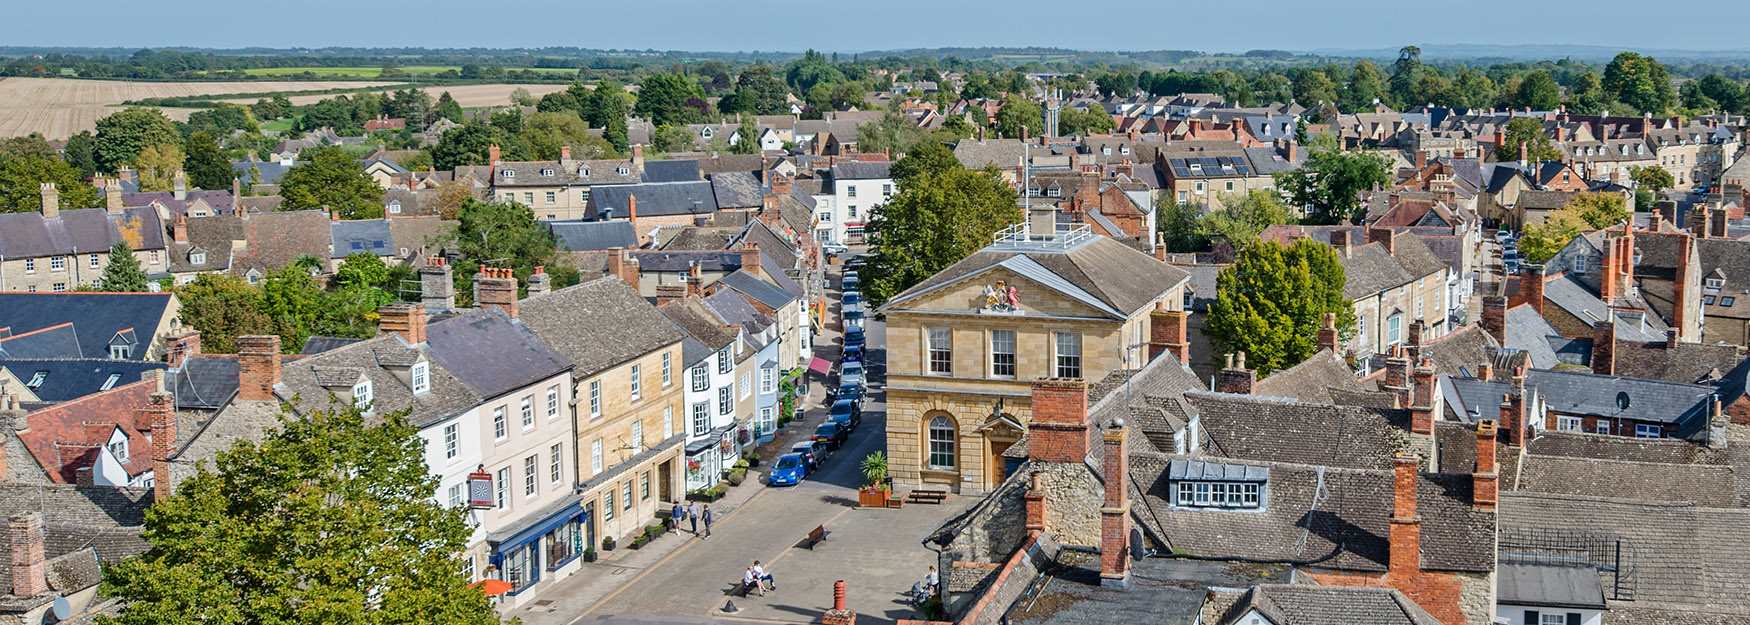 Looking down on Woodstock from the church tower (photo by Jay Alice Photographic)